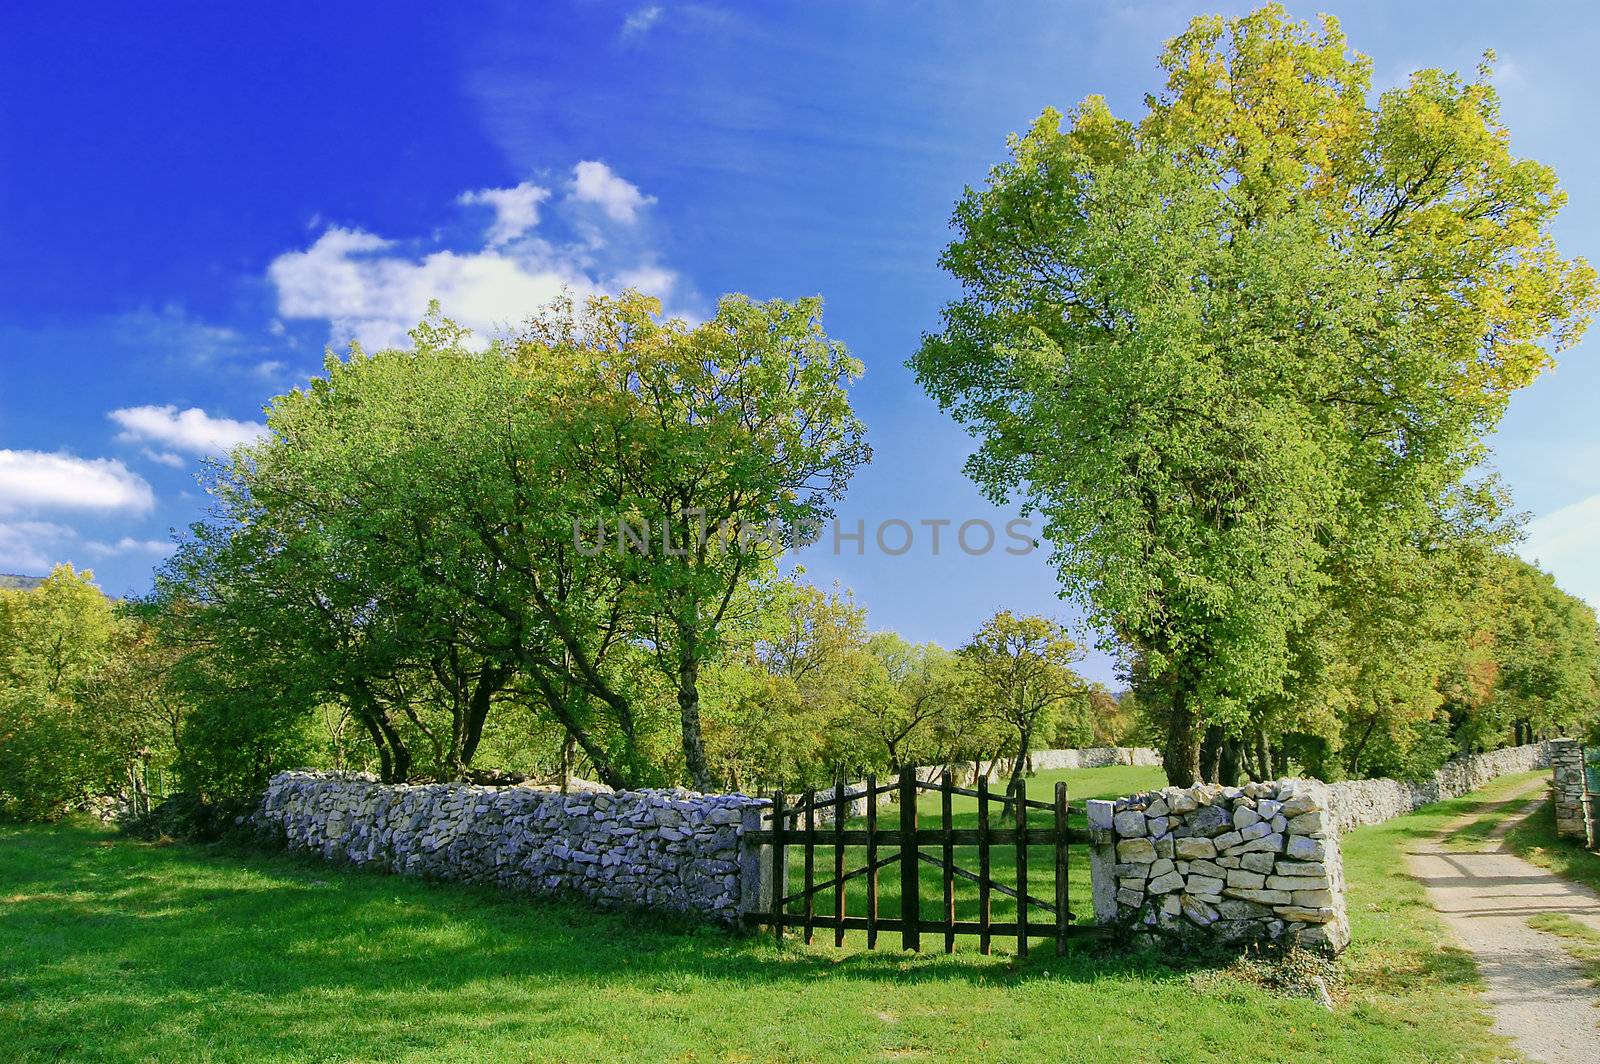 Wooden gate in a stone wall